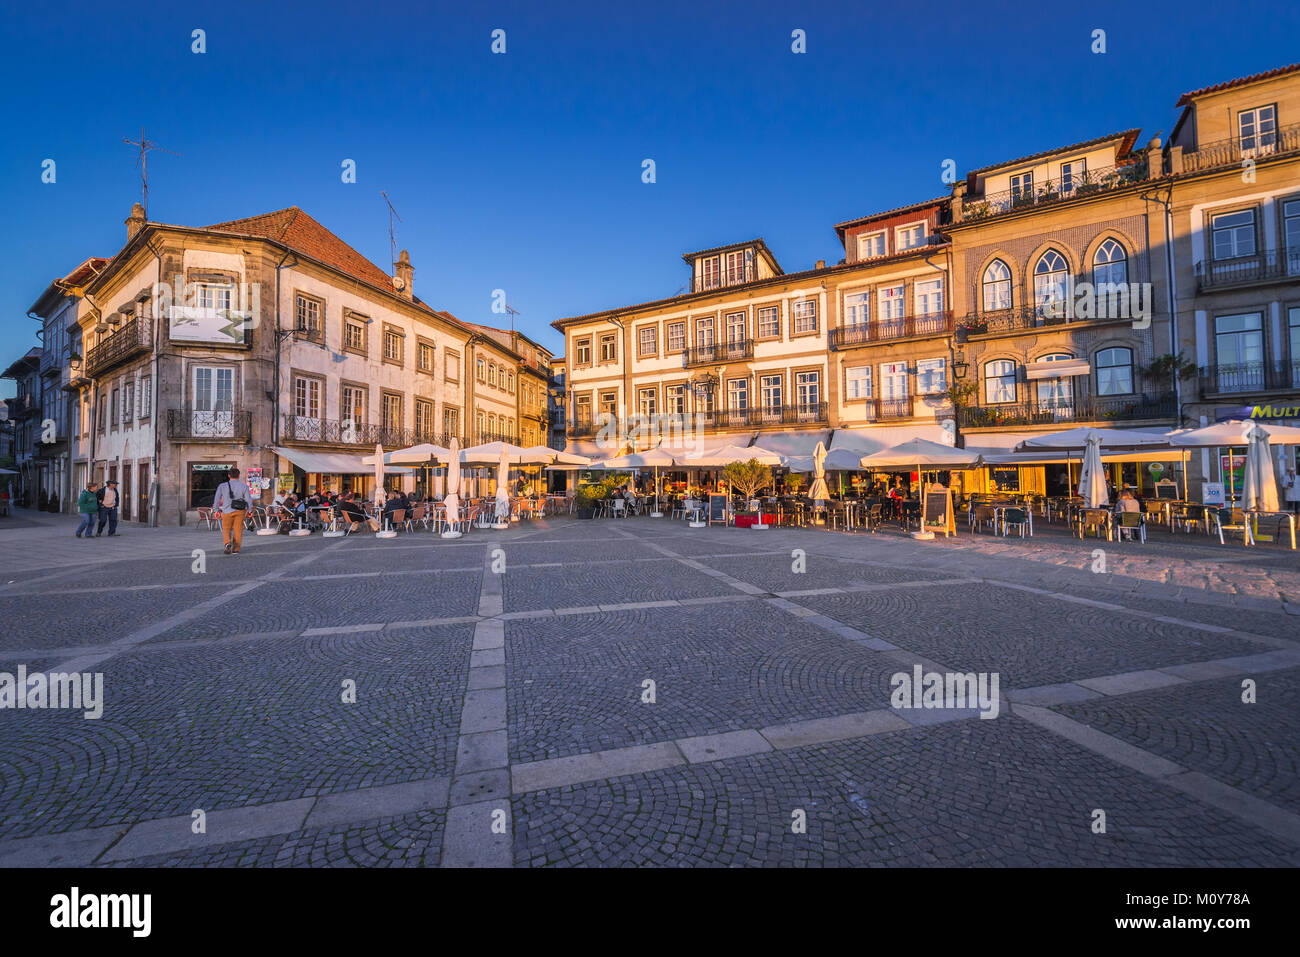 Camoes Square in Ponte de Lima city, part of the district of Viana do Castelo, Norte region of Portugal Stock Photo